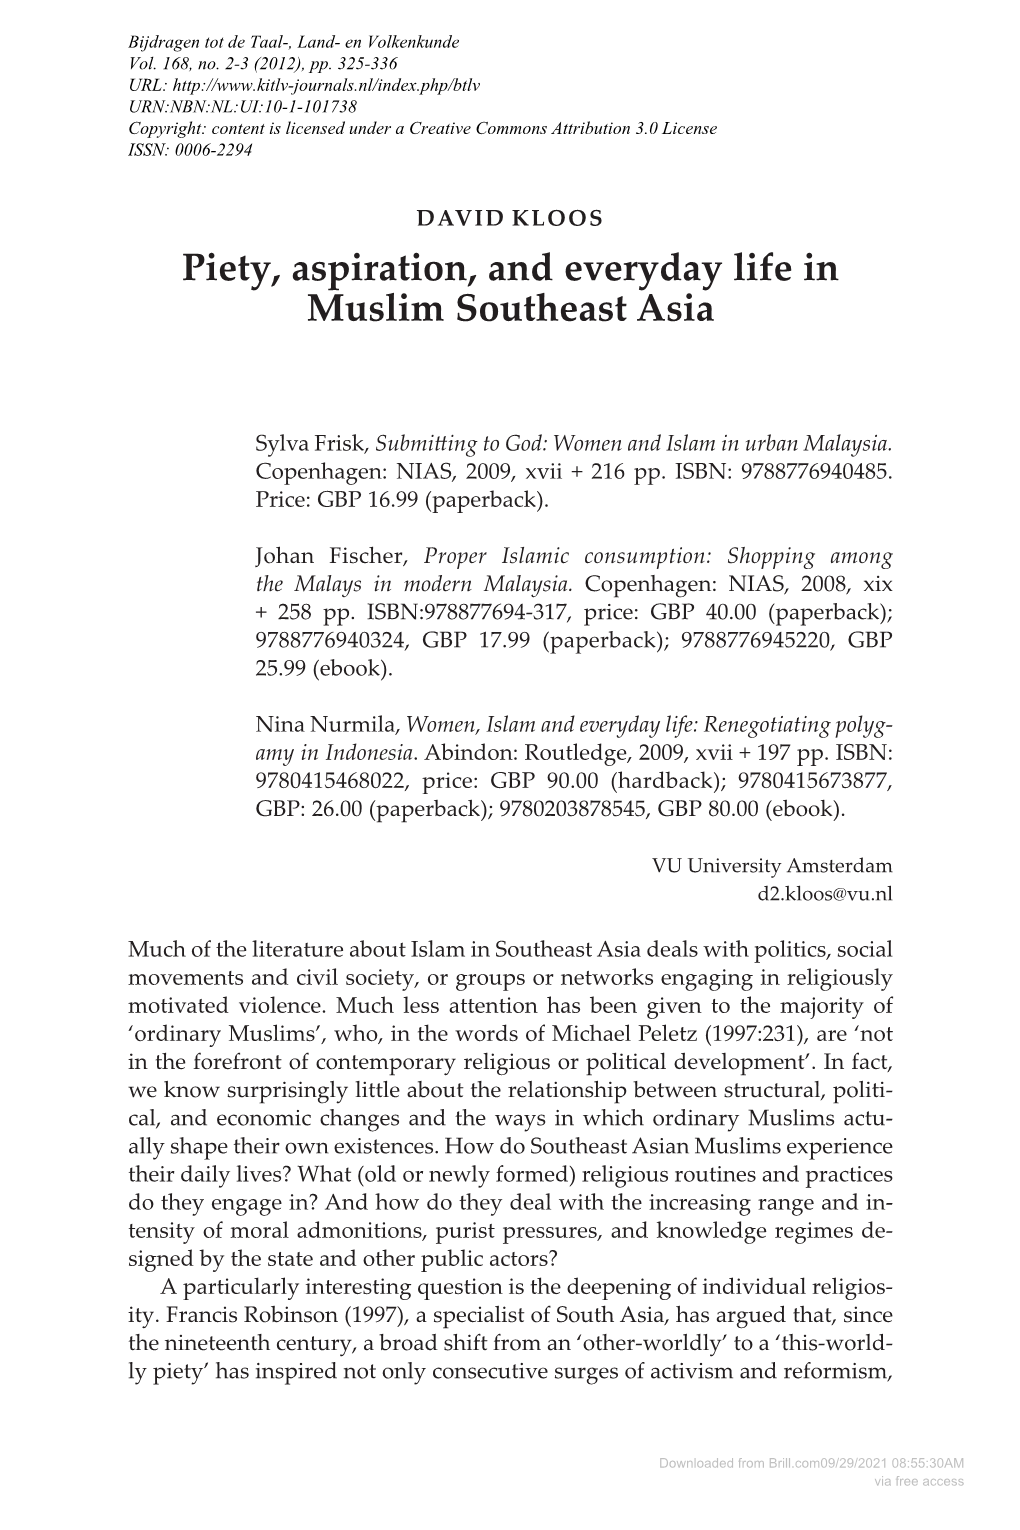 Piety, Aspiration, and Everyday Life in Muslim Southeast Asia